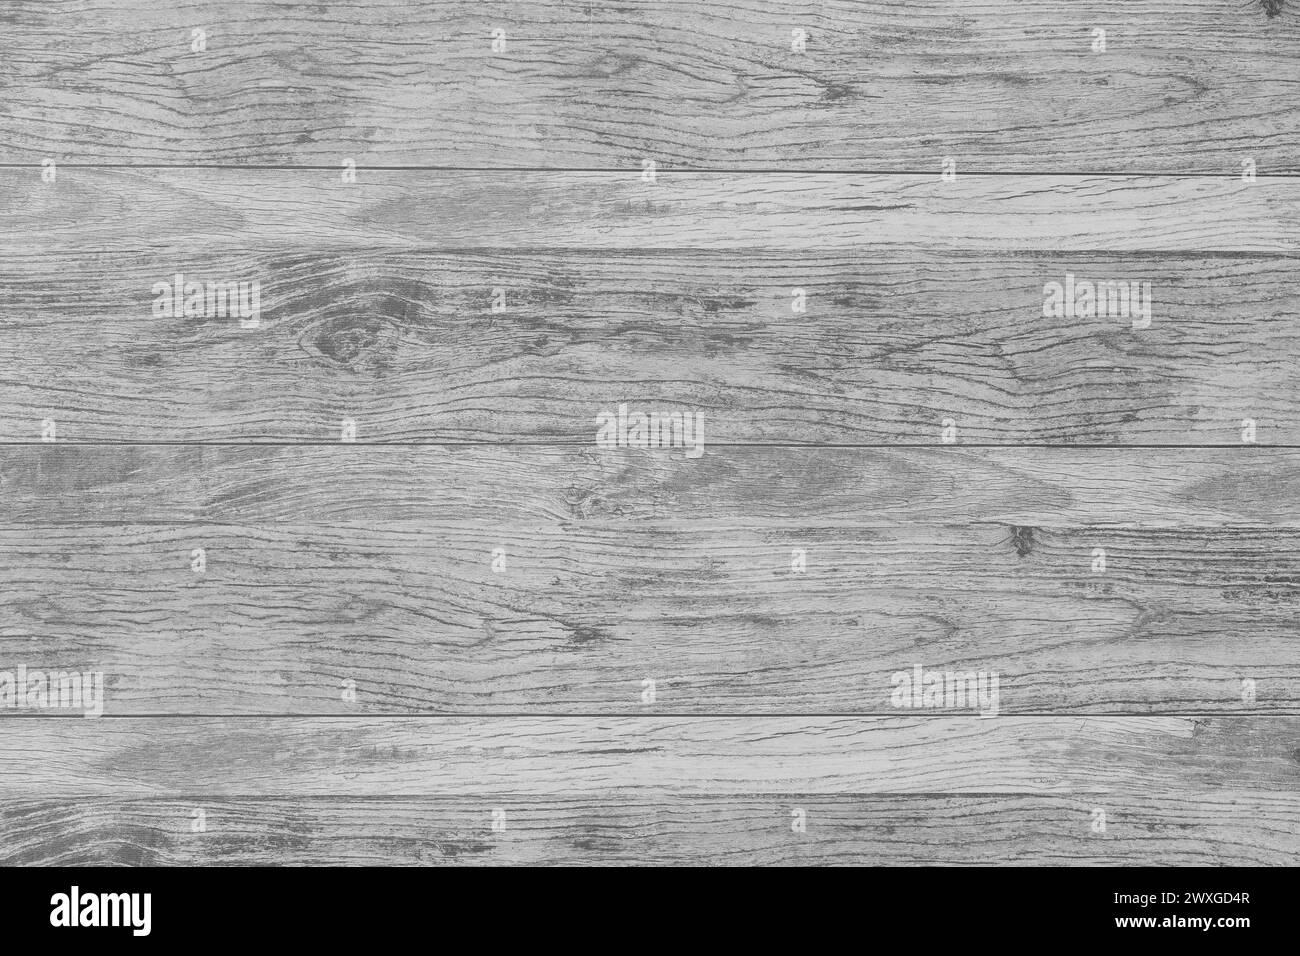 Horizontal Light Wood Texture Boards Floor Surface Wooden Background Plank Table Gray. Stock Photo